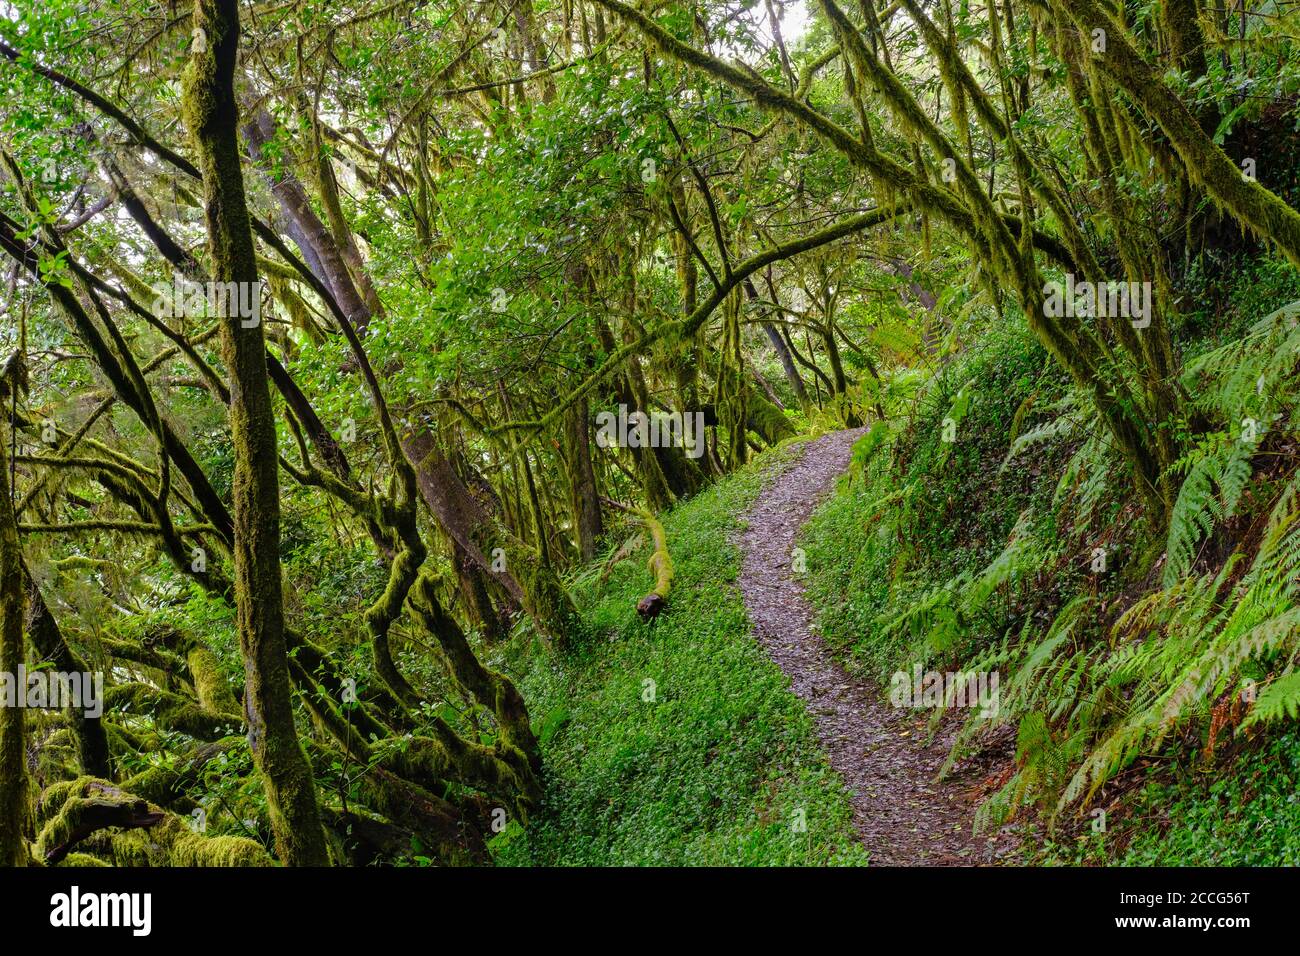 Forest path in the cloud forest at El Cedro, Garajonay National Park, La Gomera, Canary Islands, Spain Stock Photo